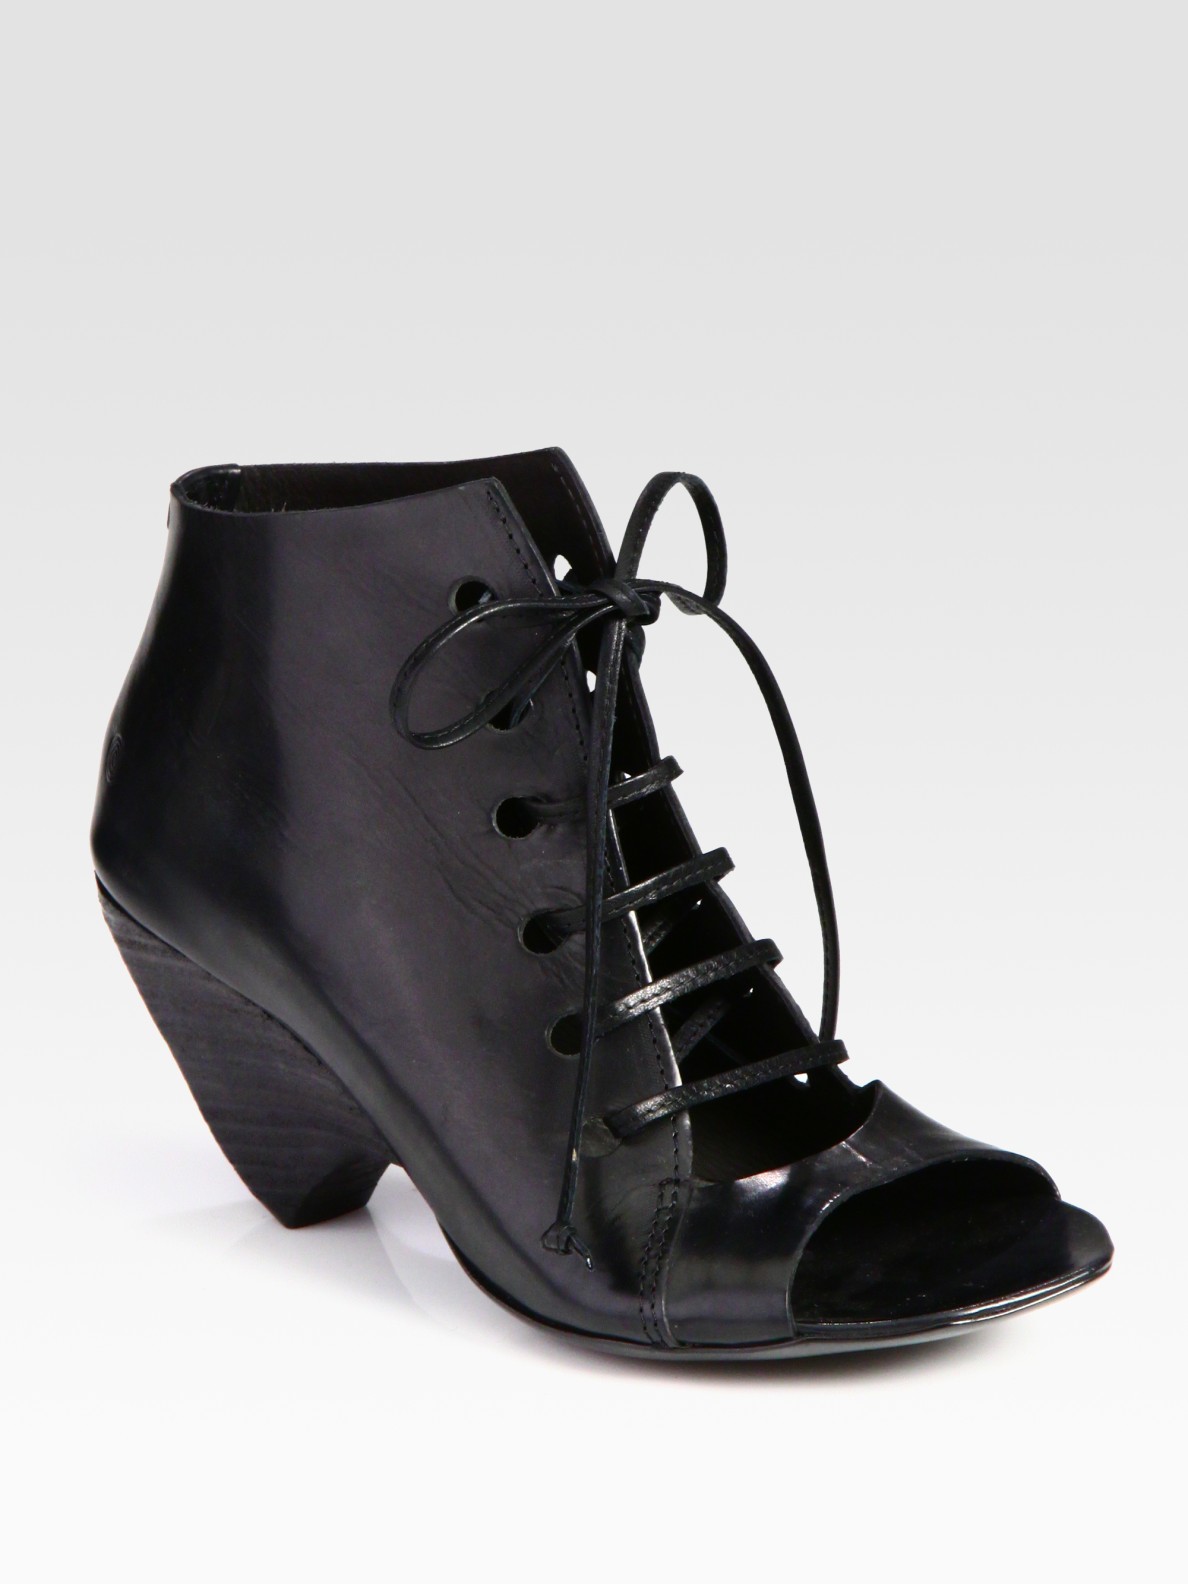 Marsell Laceup Leather Peep Toe Ankle Boots in Black | Lyst